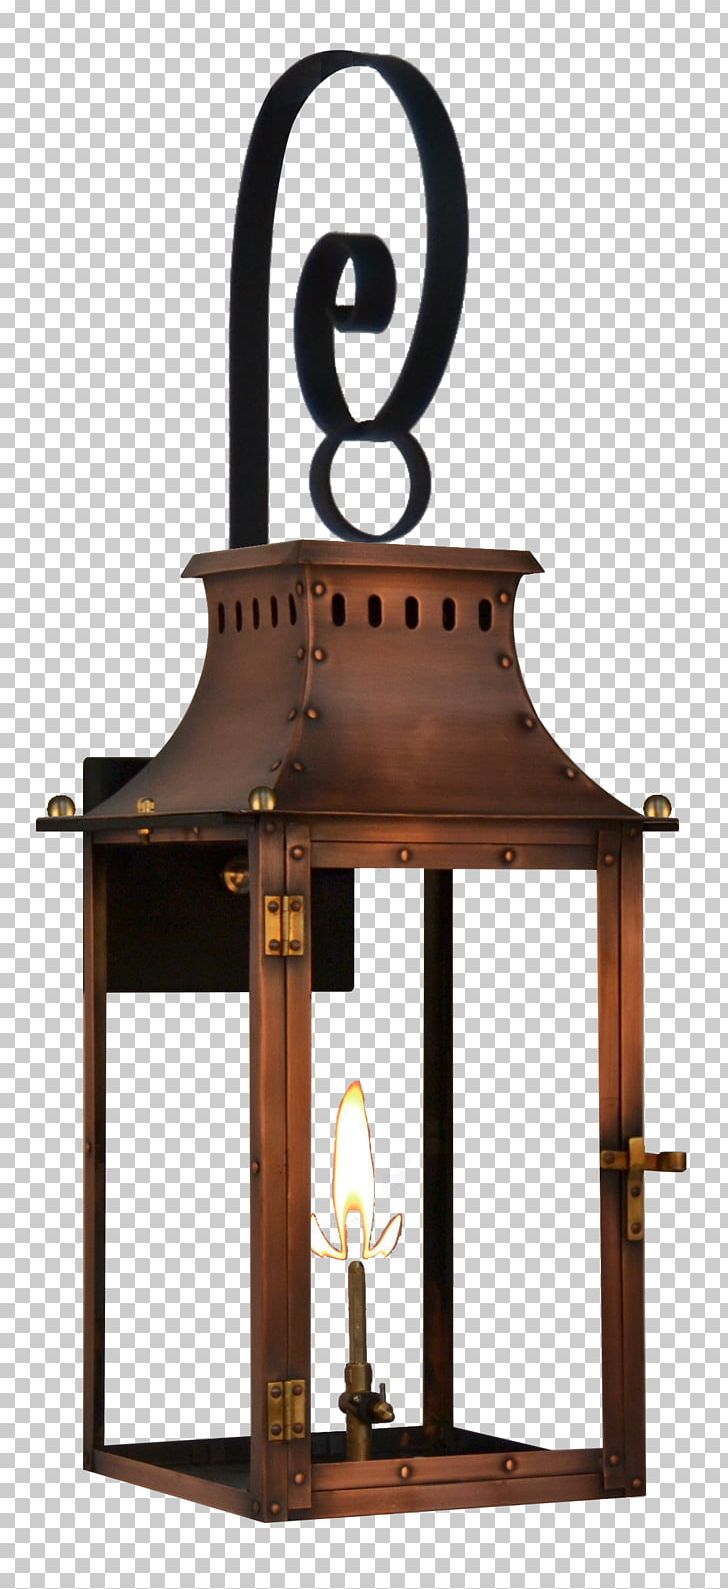 Gas Lighting Lantern Coppersmith PNG, Clipart, Candle, Coppersmith, Decorative, Electric Light, Furniture Free PNG Download